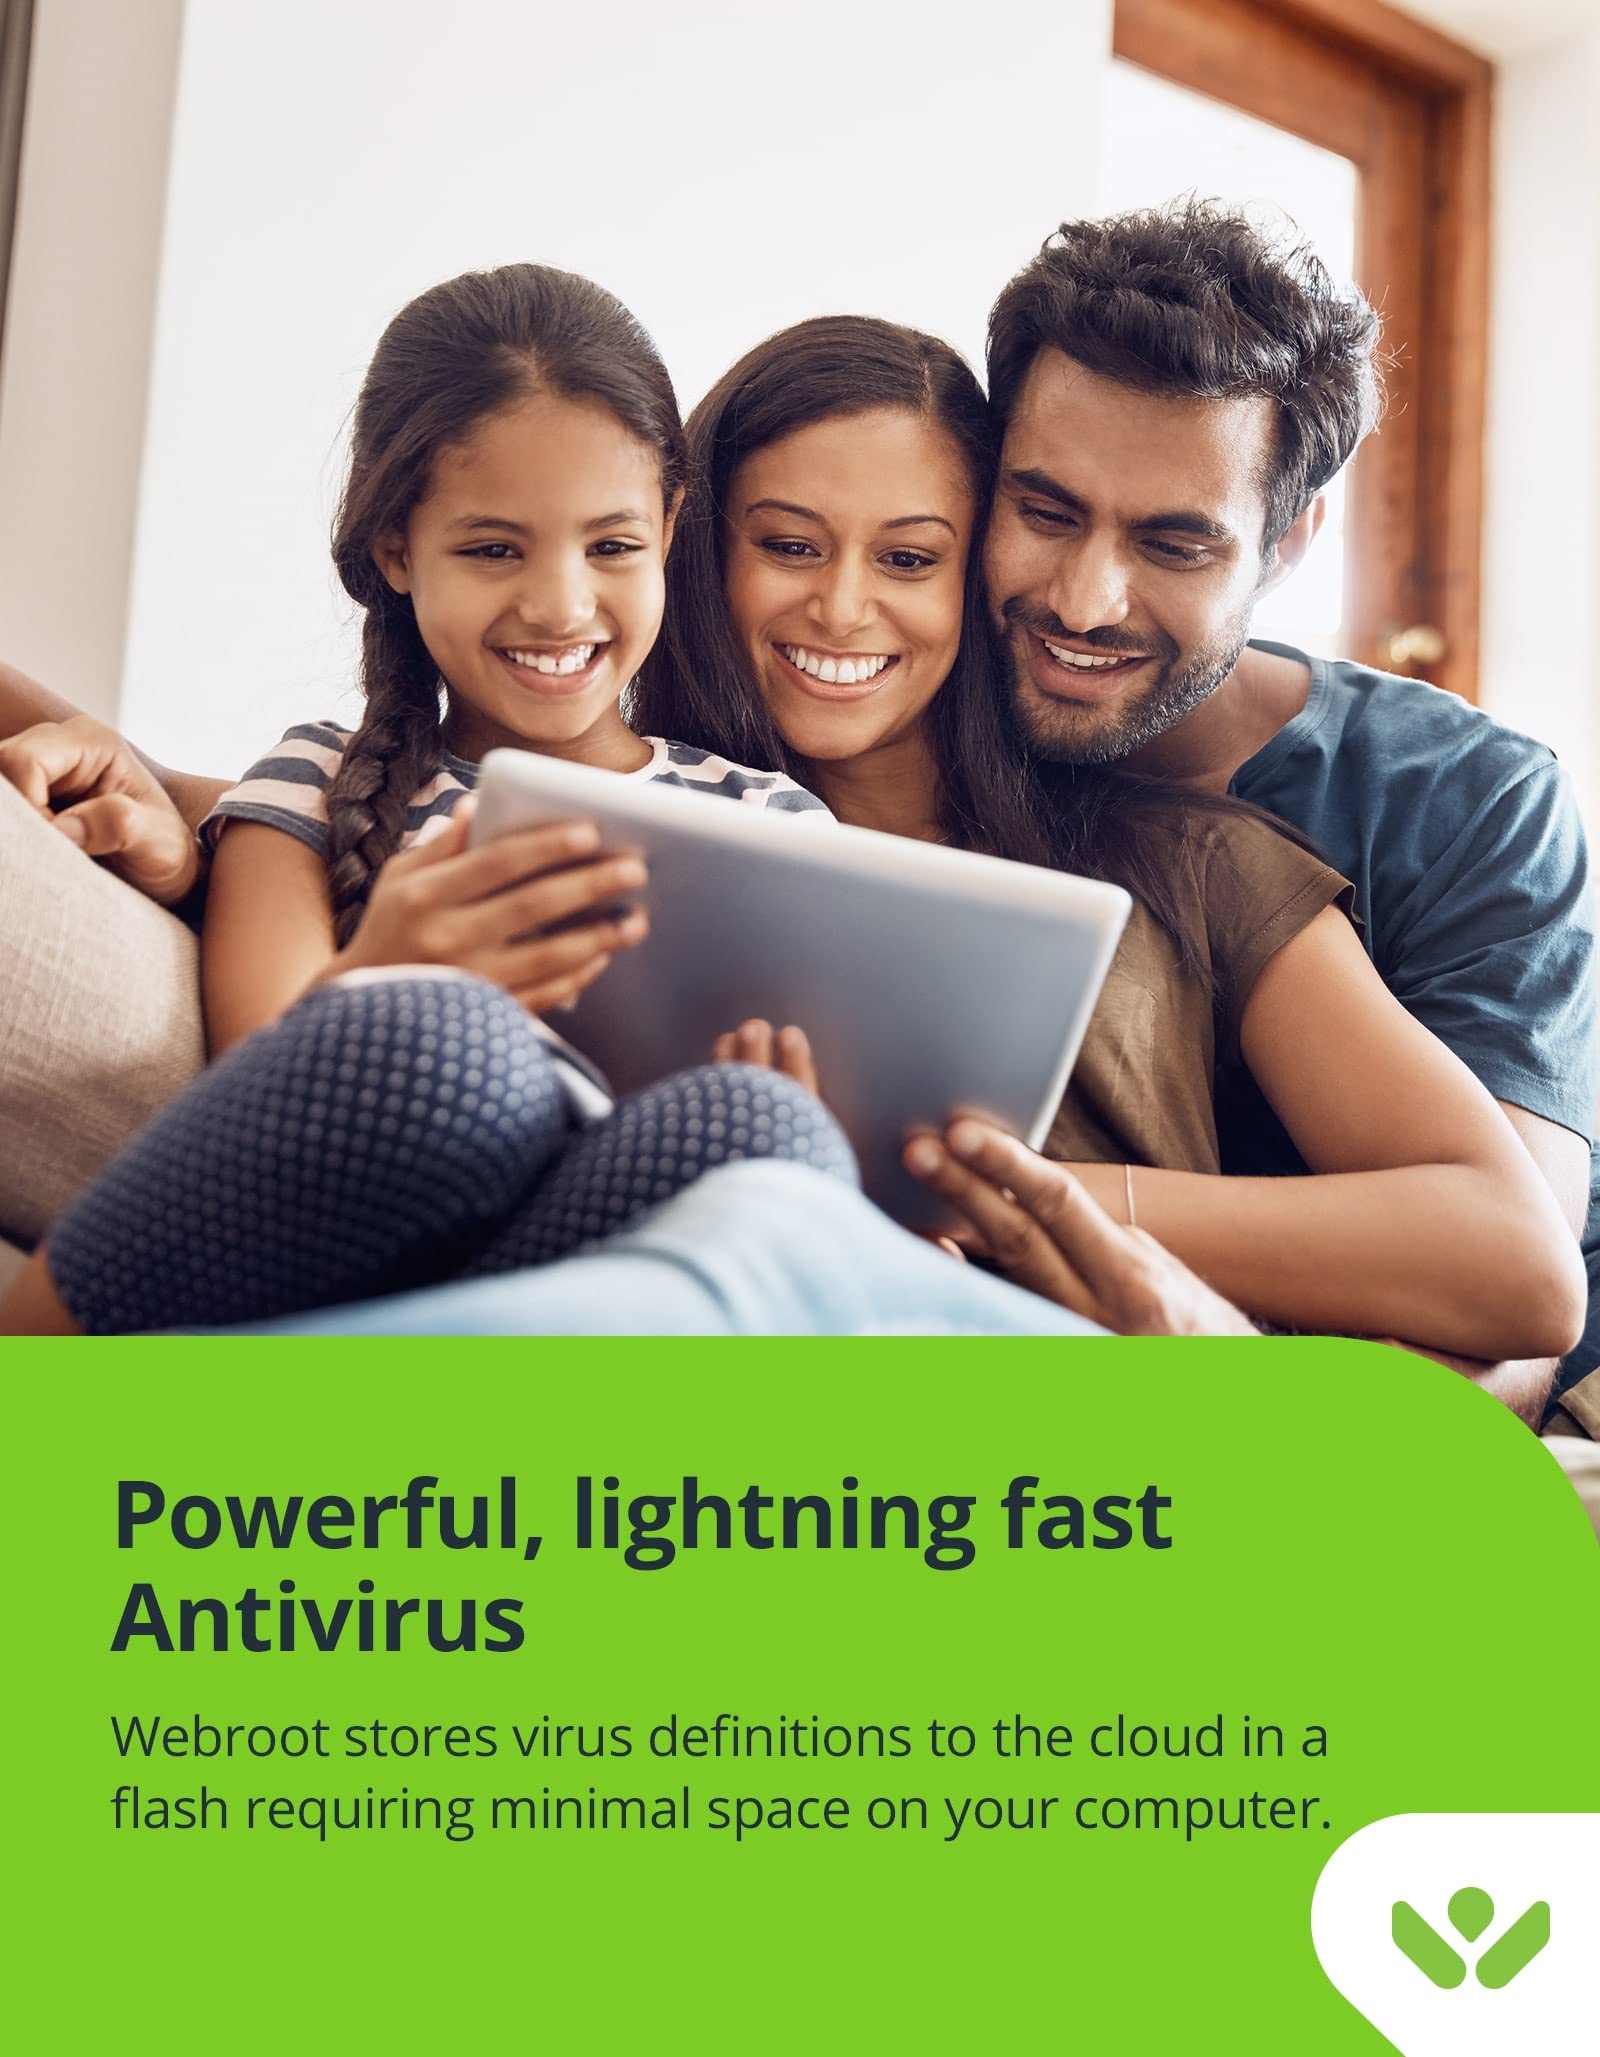 Webroot Internet Security Plus | Antivirus Software 2023 |3 Device | 1 Year Download for PC/Mac/Chromebook/Android/IOS + Password Manager